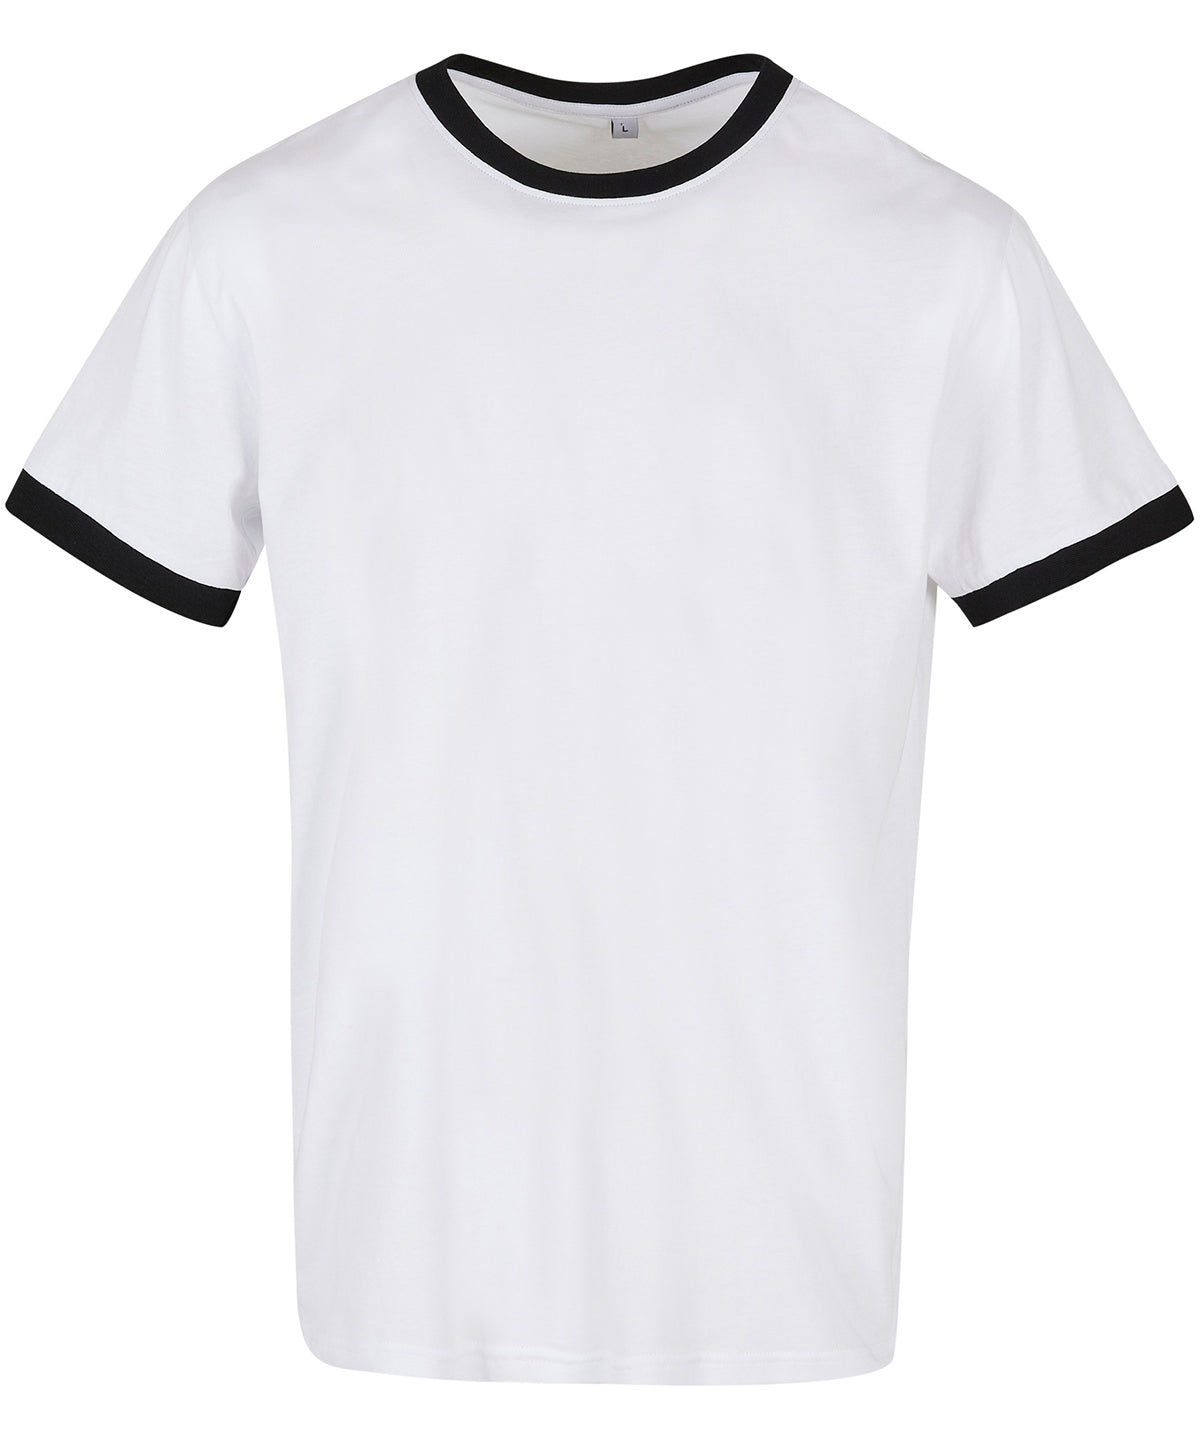 Coozo BB022 Sporty Men's Round neck contrast piping Ringer tee 100% Cotton single Jersey - COOZO